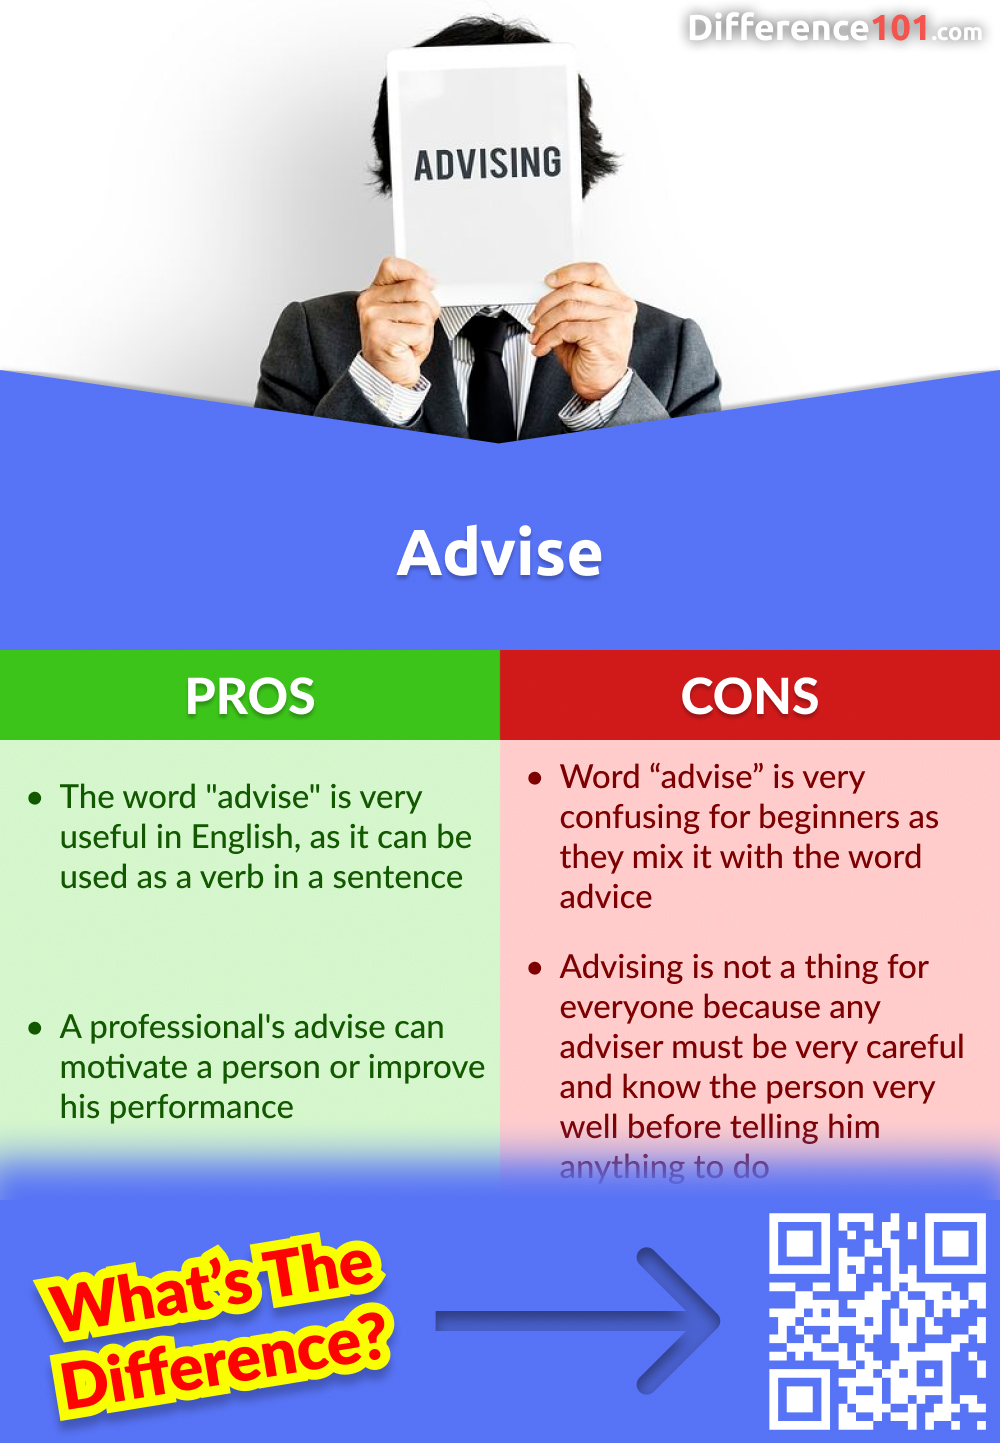 Advise Pros and Cons
